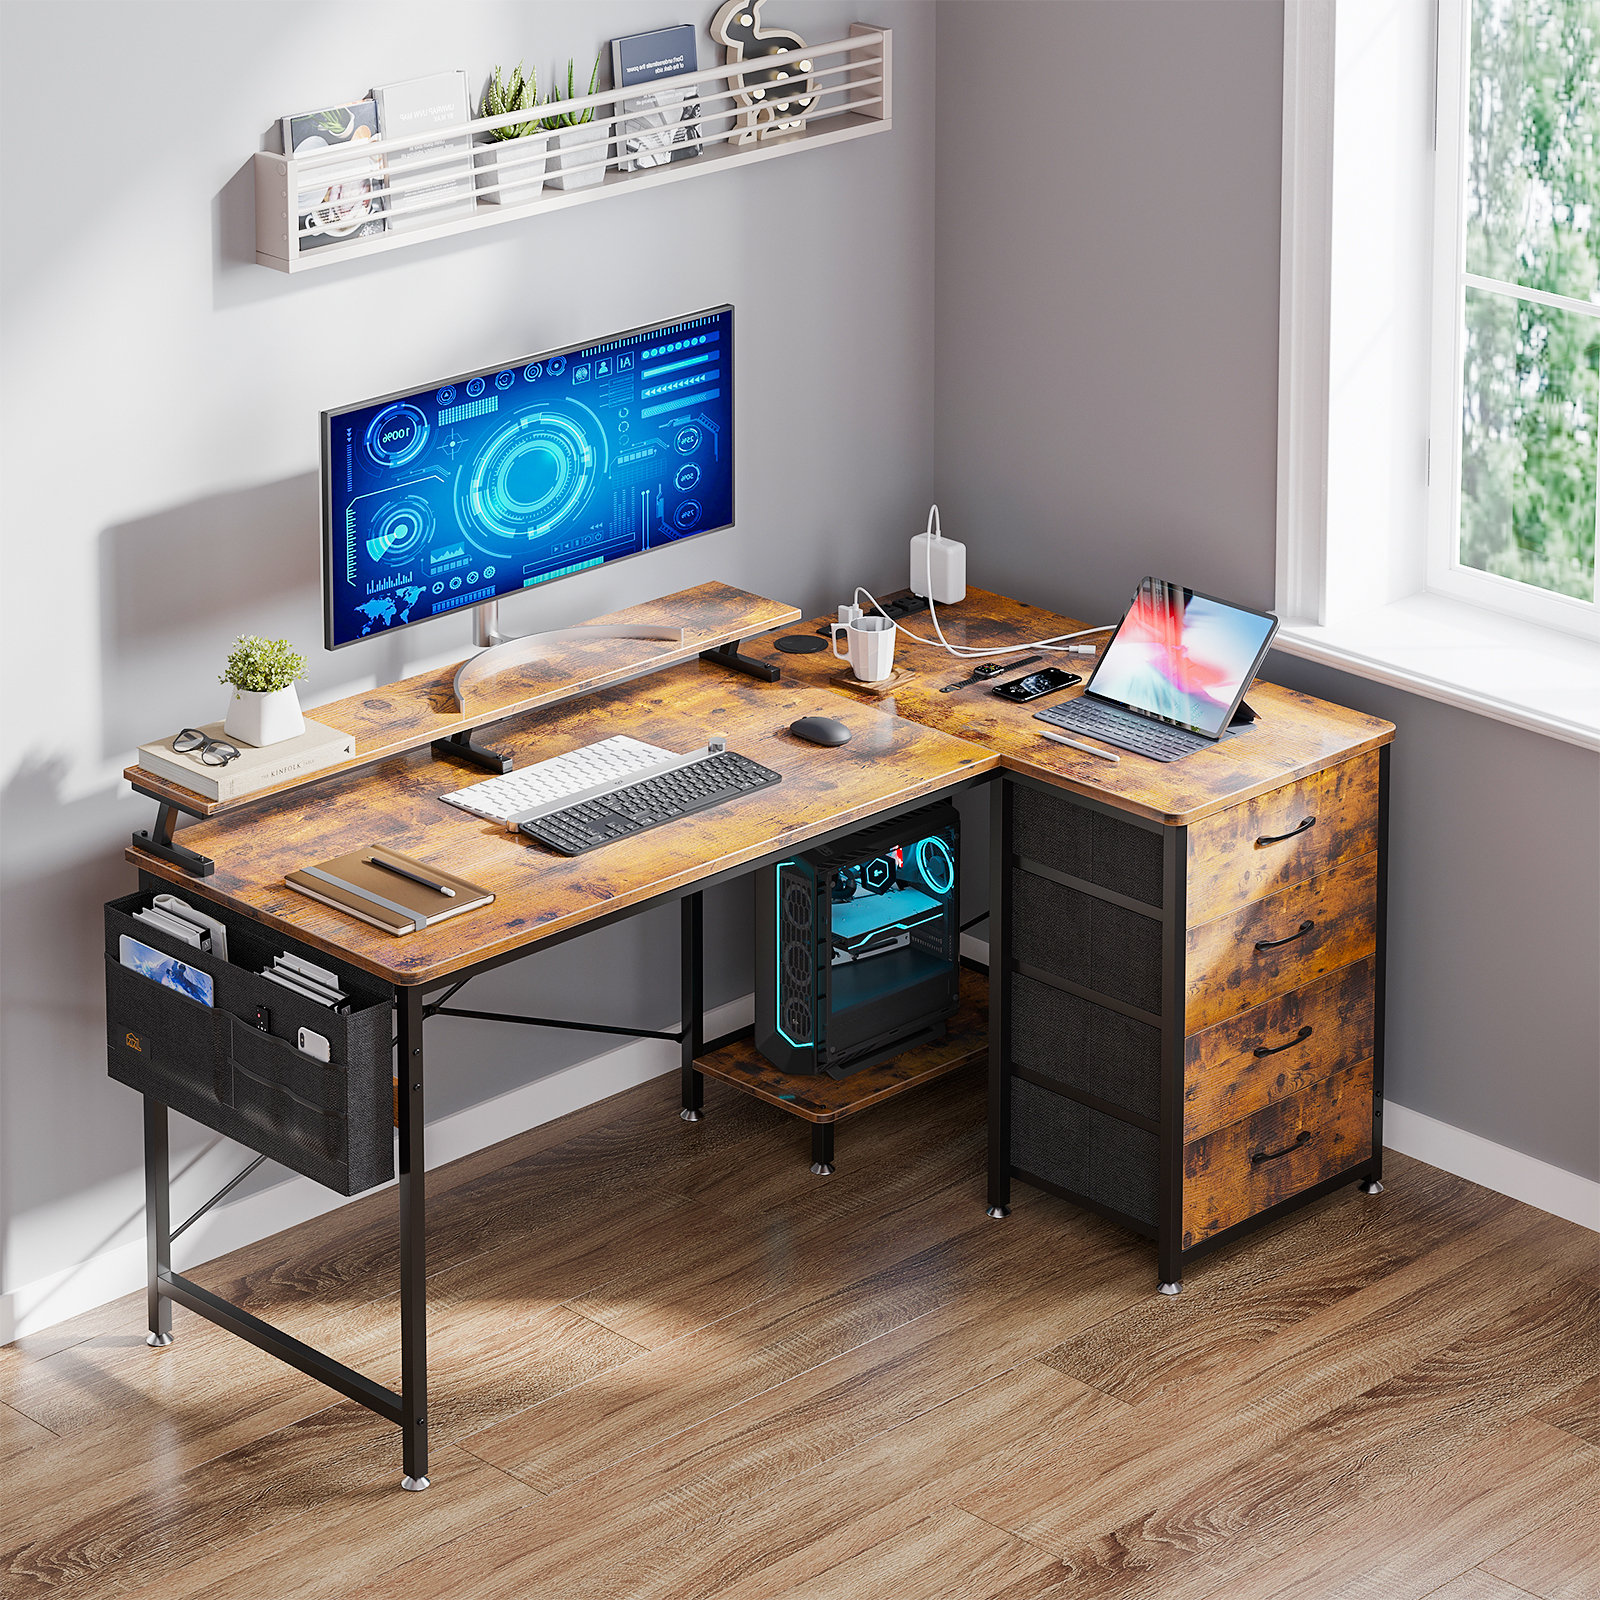 168 PC Desk Pet with Home Kit for 24